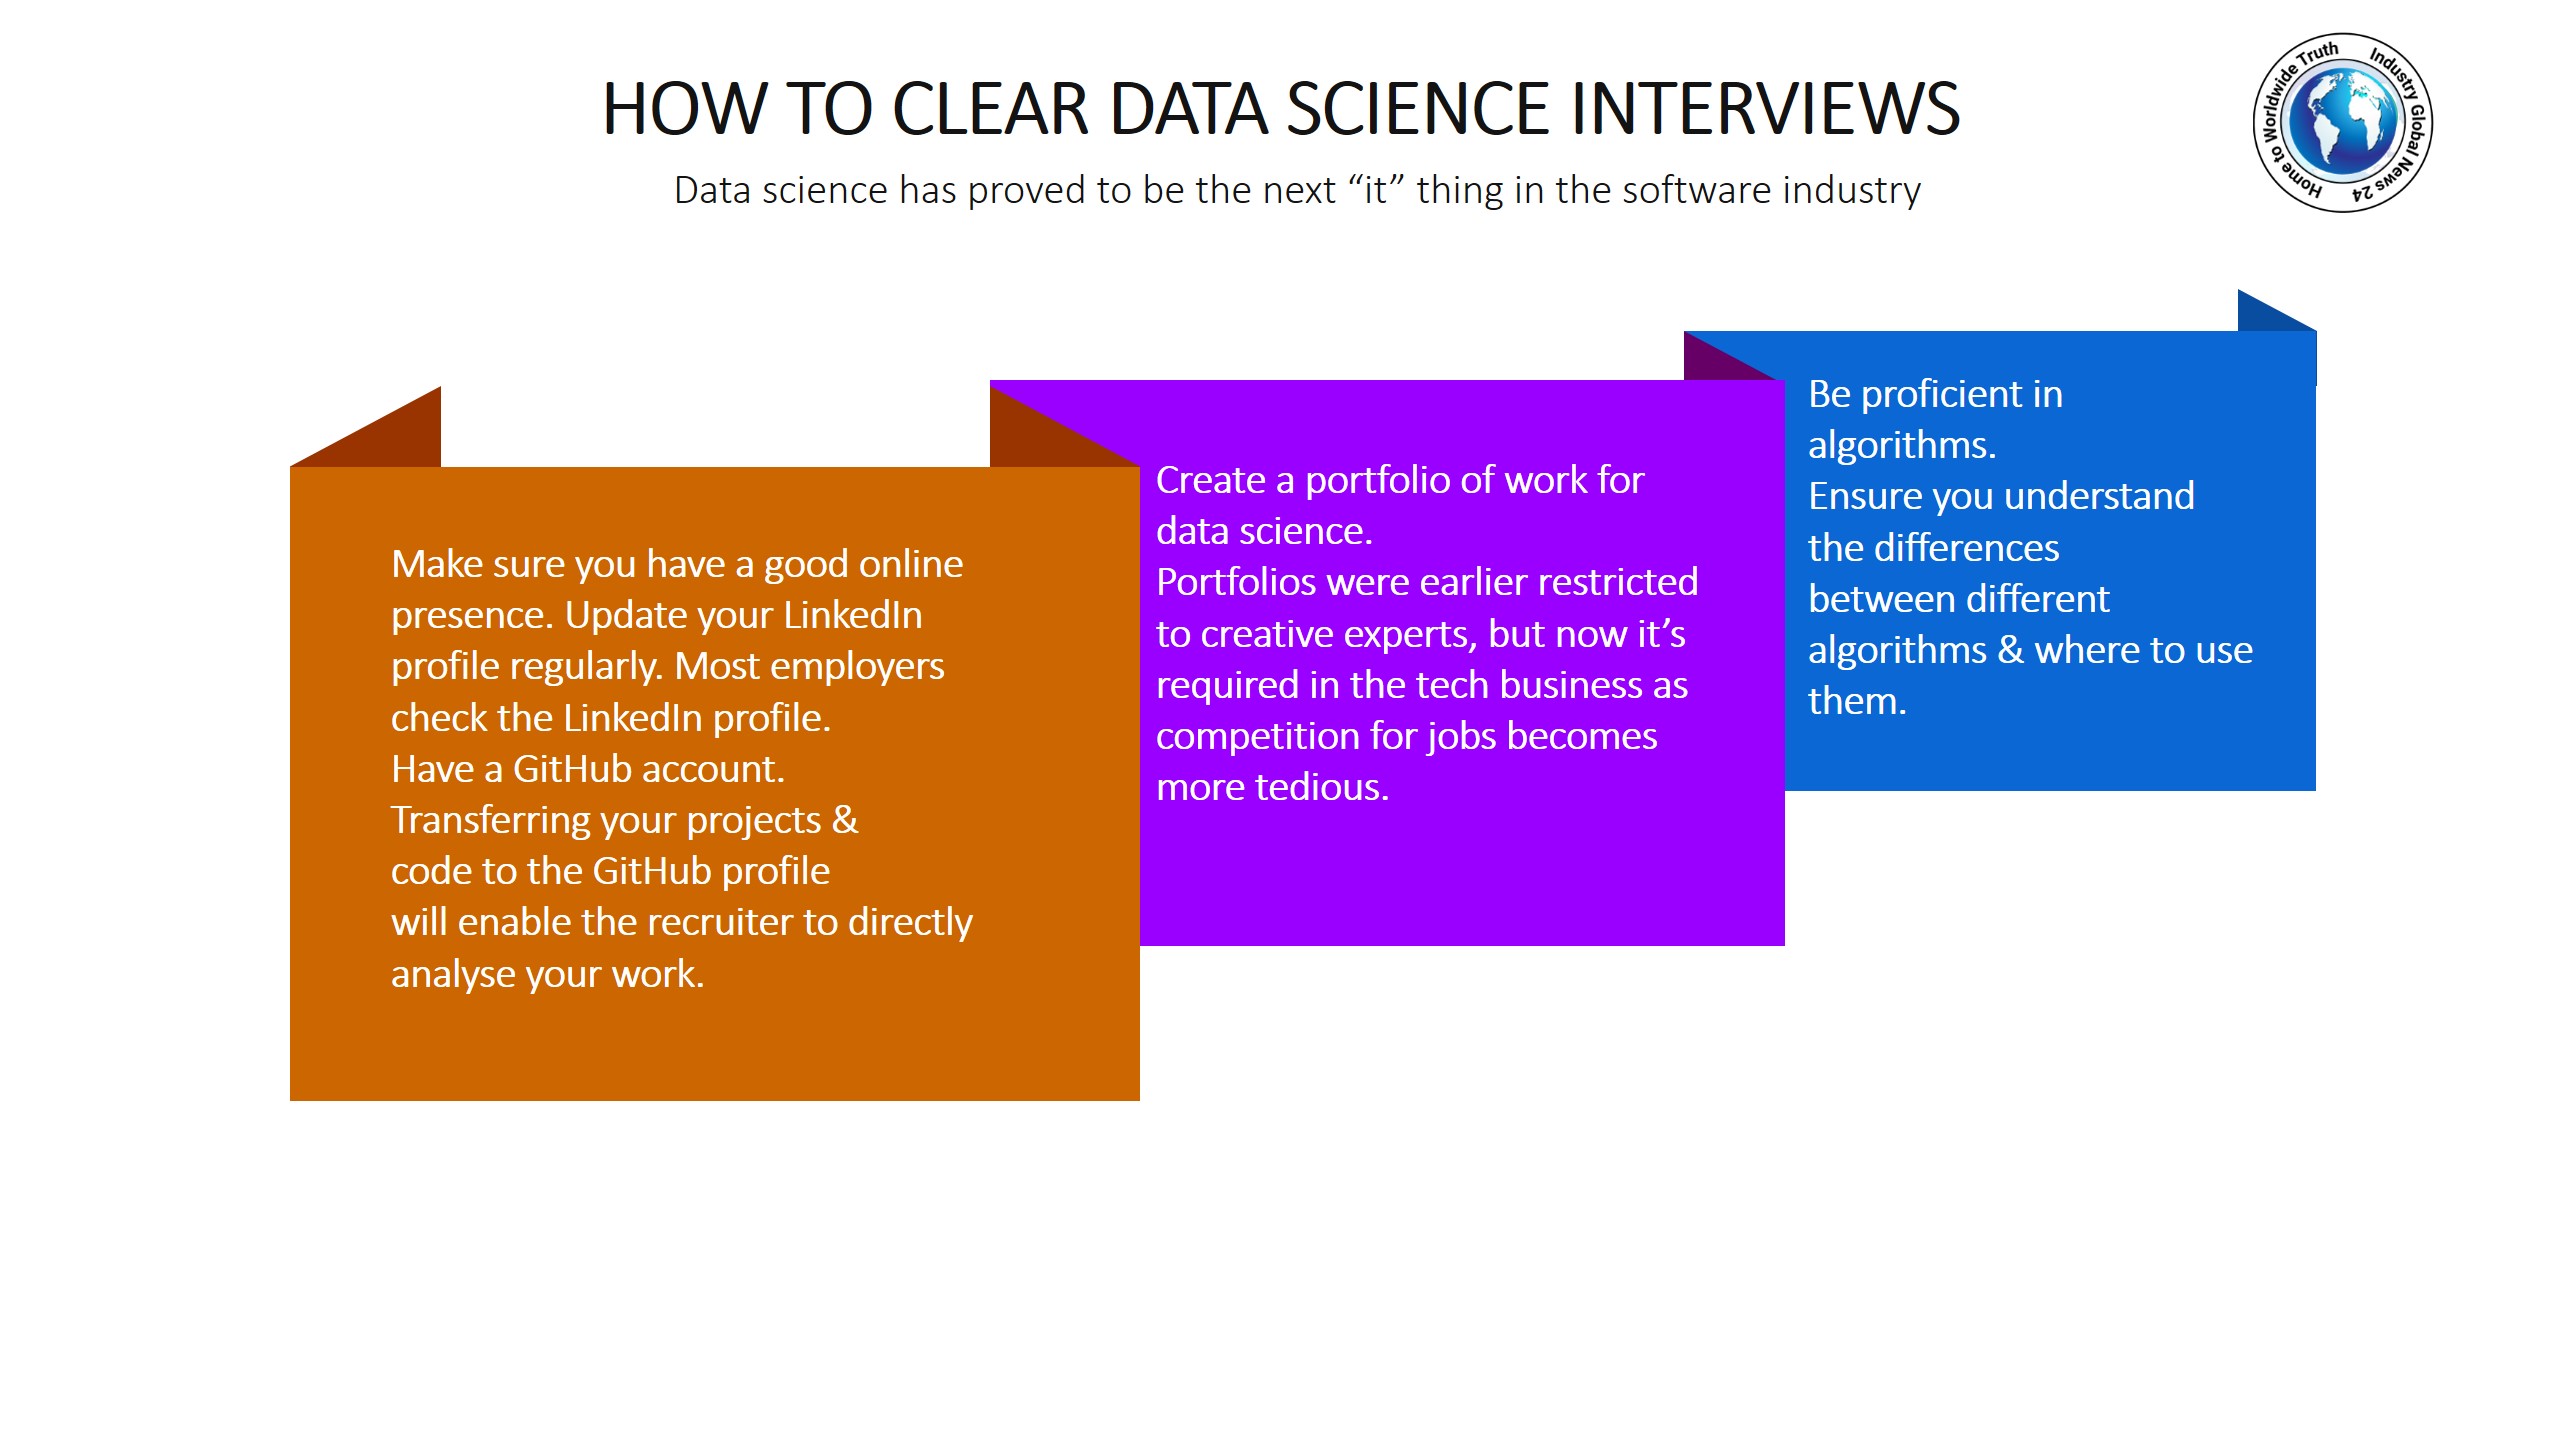 How to clear data science interviews